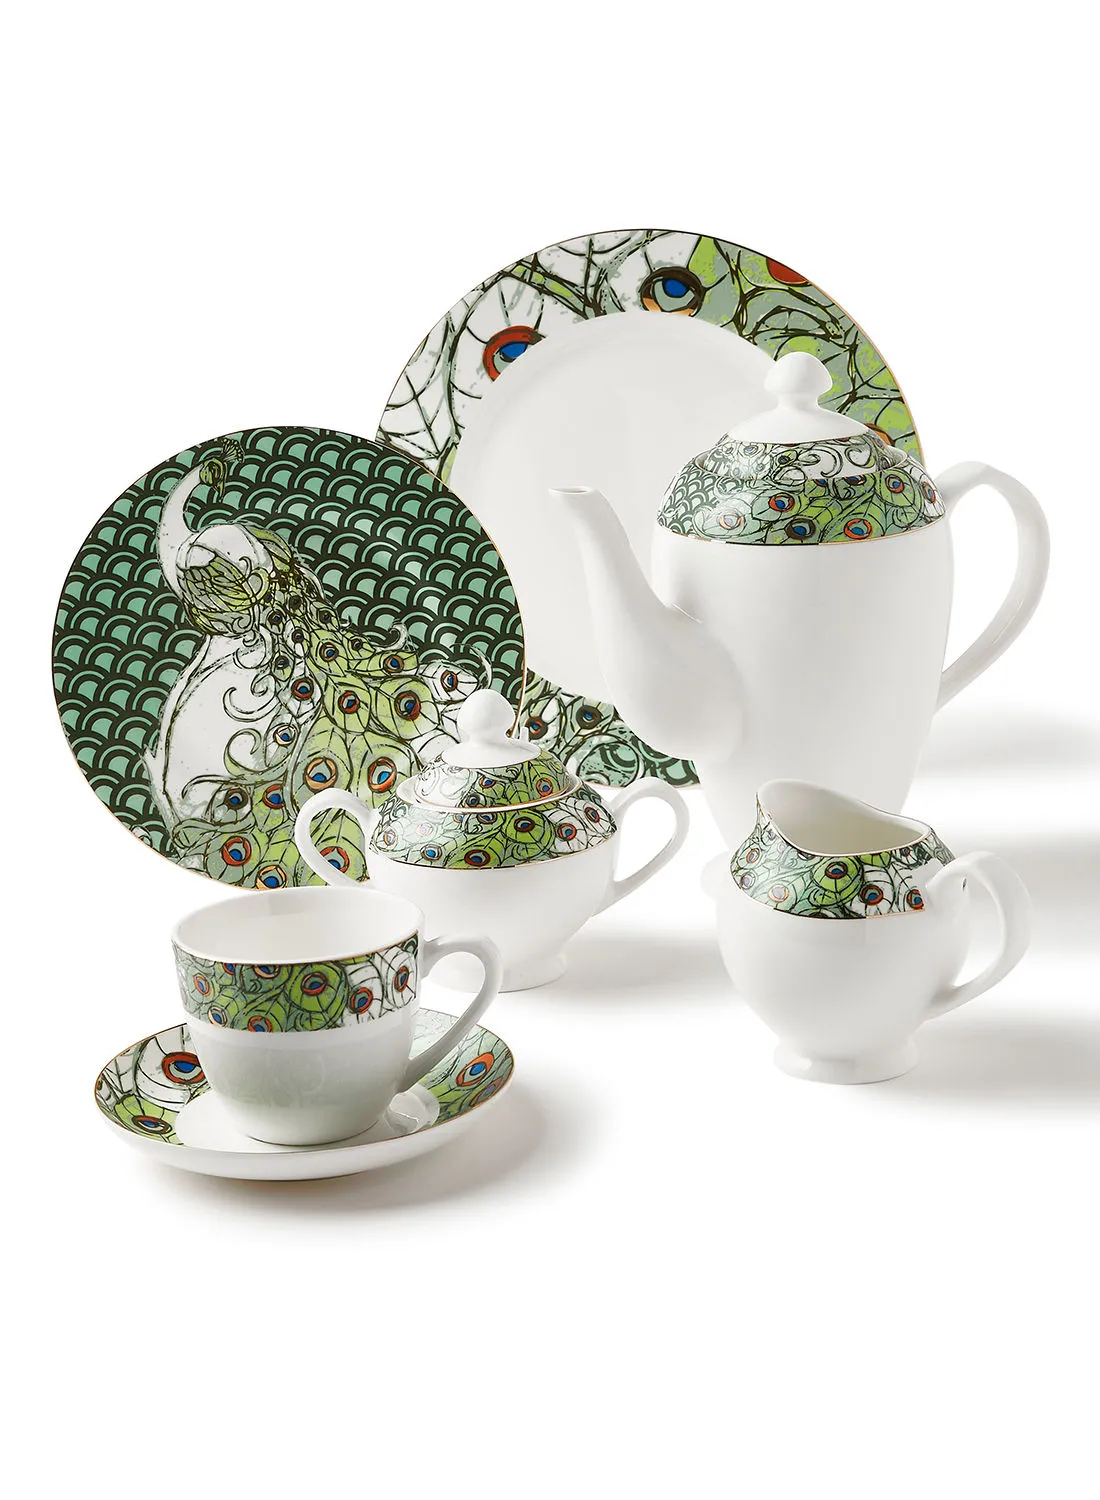 noon east 50 Piece Ceramic Dinner Set Premium Quality - Dishes, Plates - Dinner Plate, Side Plate, Bowl, Cups, Serving Dish And Bowl - Serves 8 - Festive Design Peacock